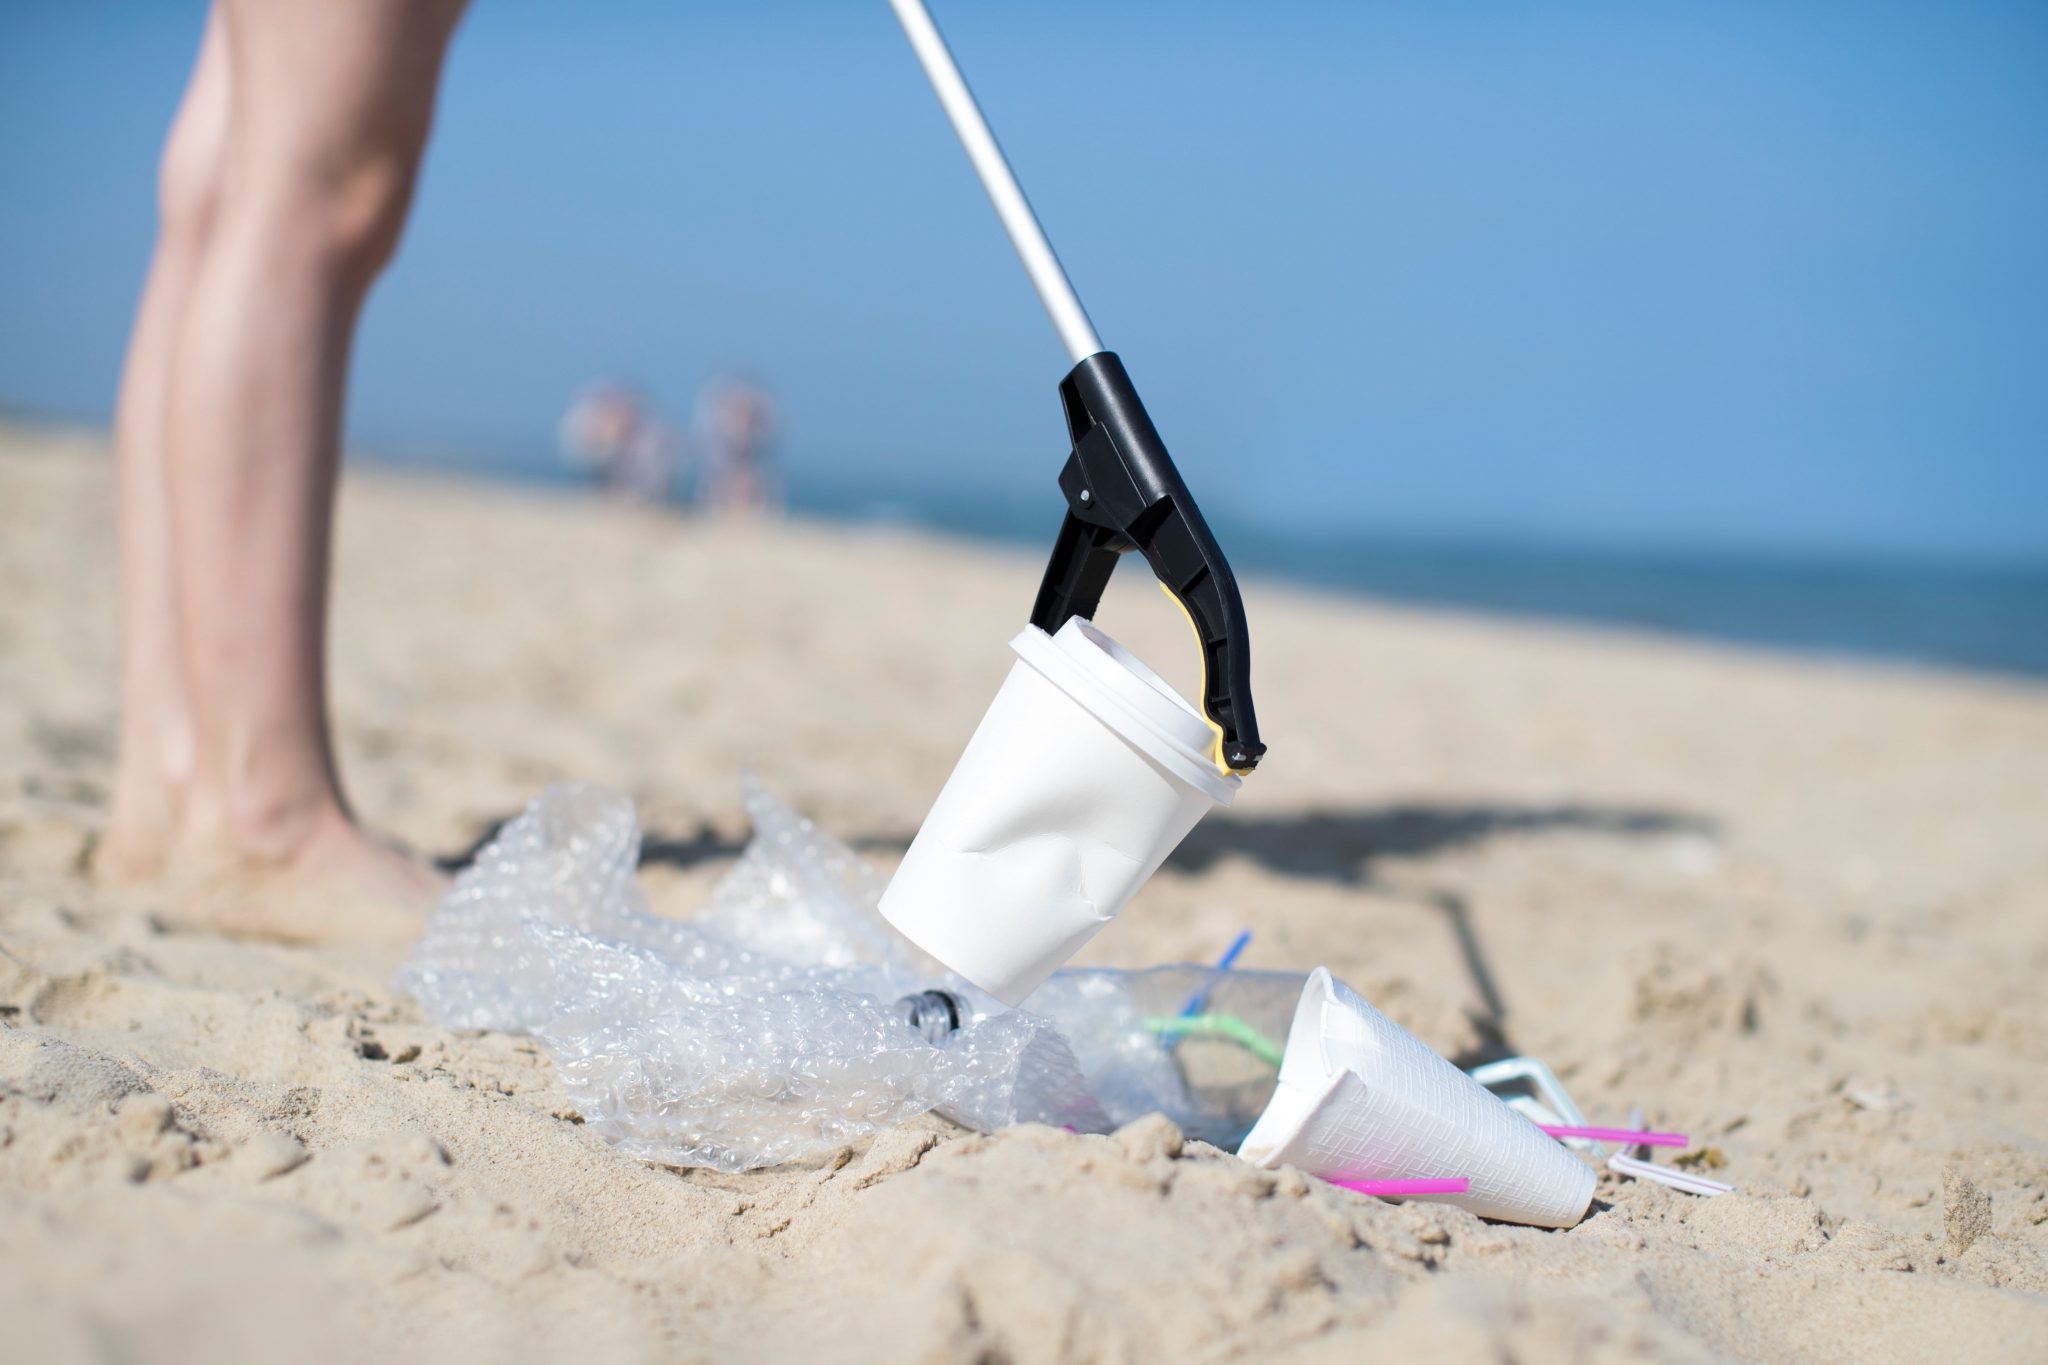 a person cleaning up litter on a beach